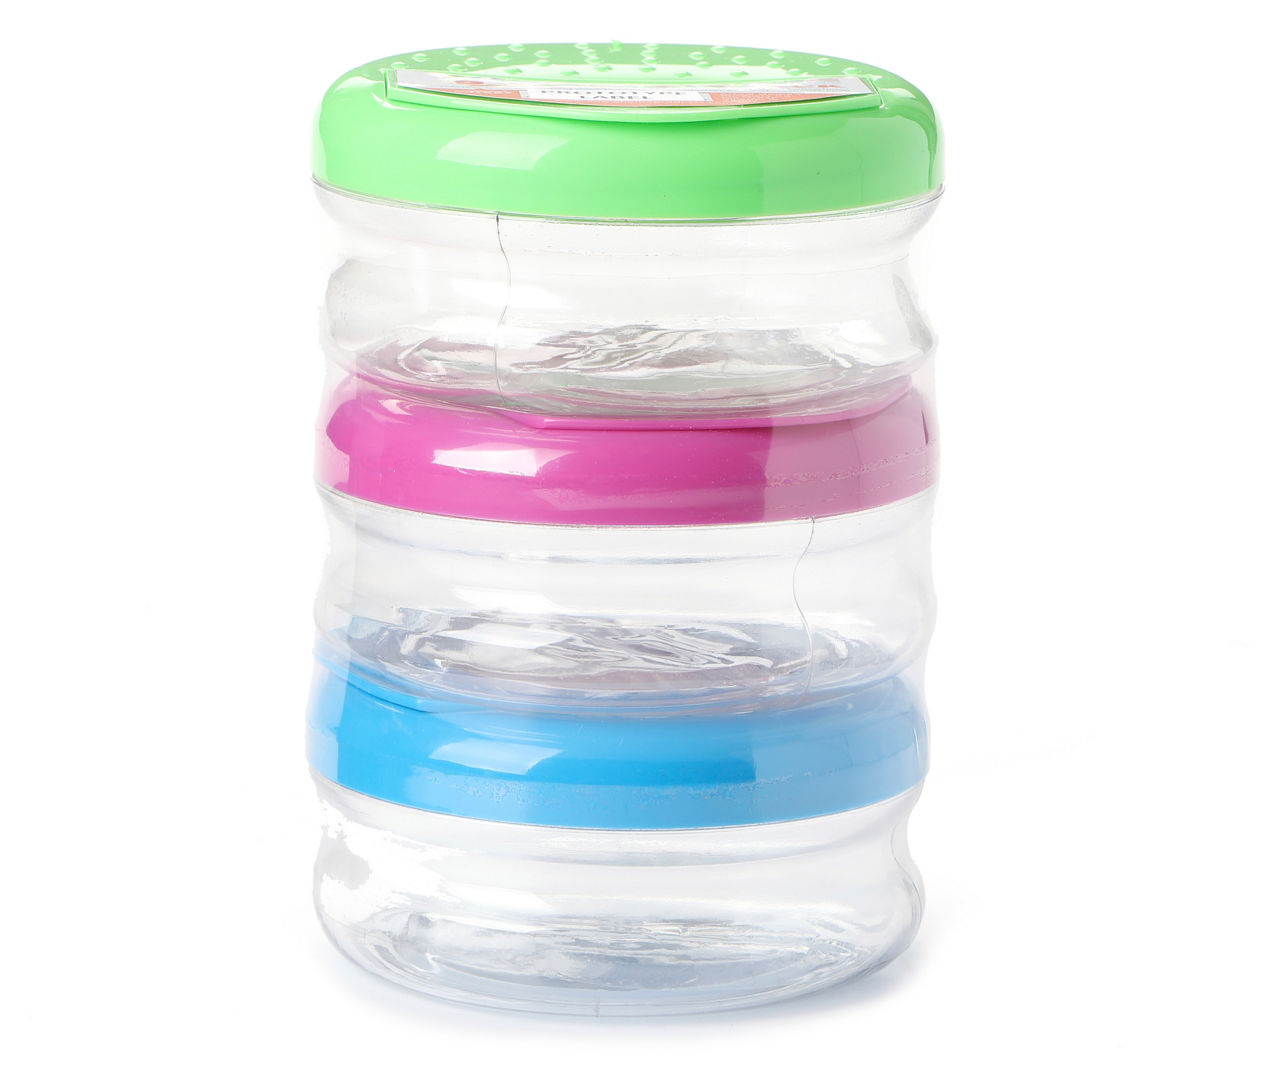 Kids Bottle With Snack Compartment & Straw 3 Assorted - Bargain WholeSalers